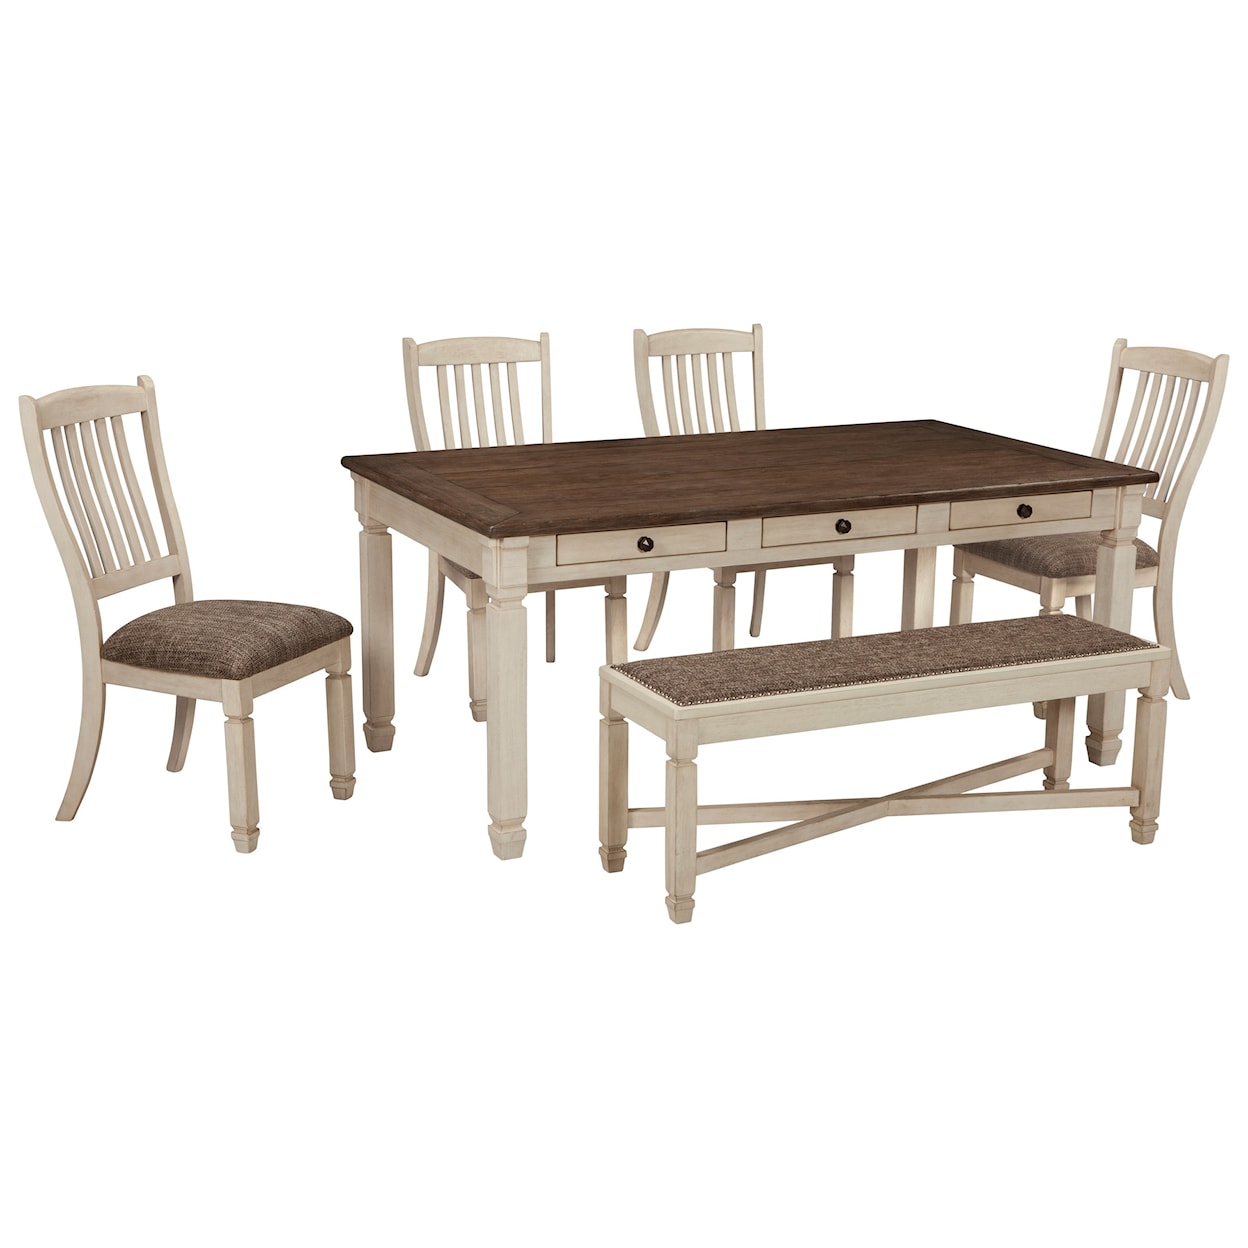 Signature Design by Ashley Bolanburg Table and Chair Set with Bench